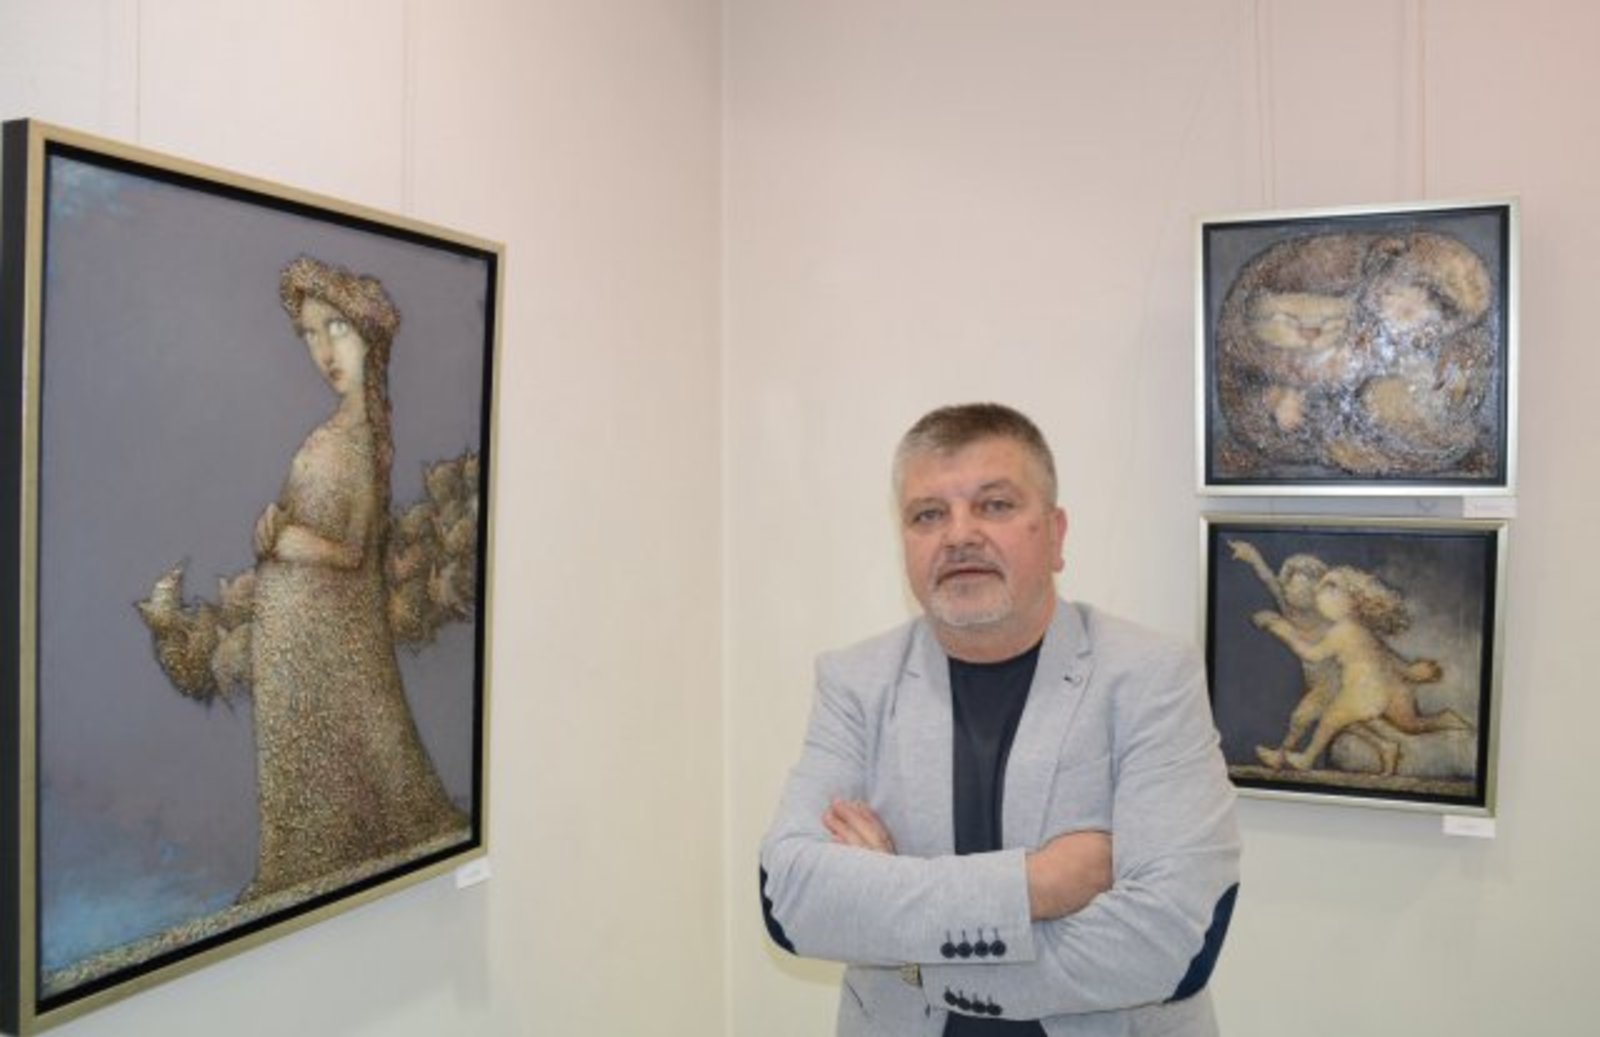 Artist Ivan Milushev to be Awarded at the "Kastra" Festival in Slovenia